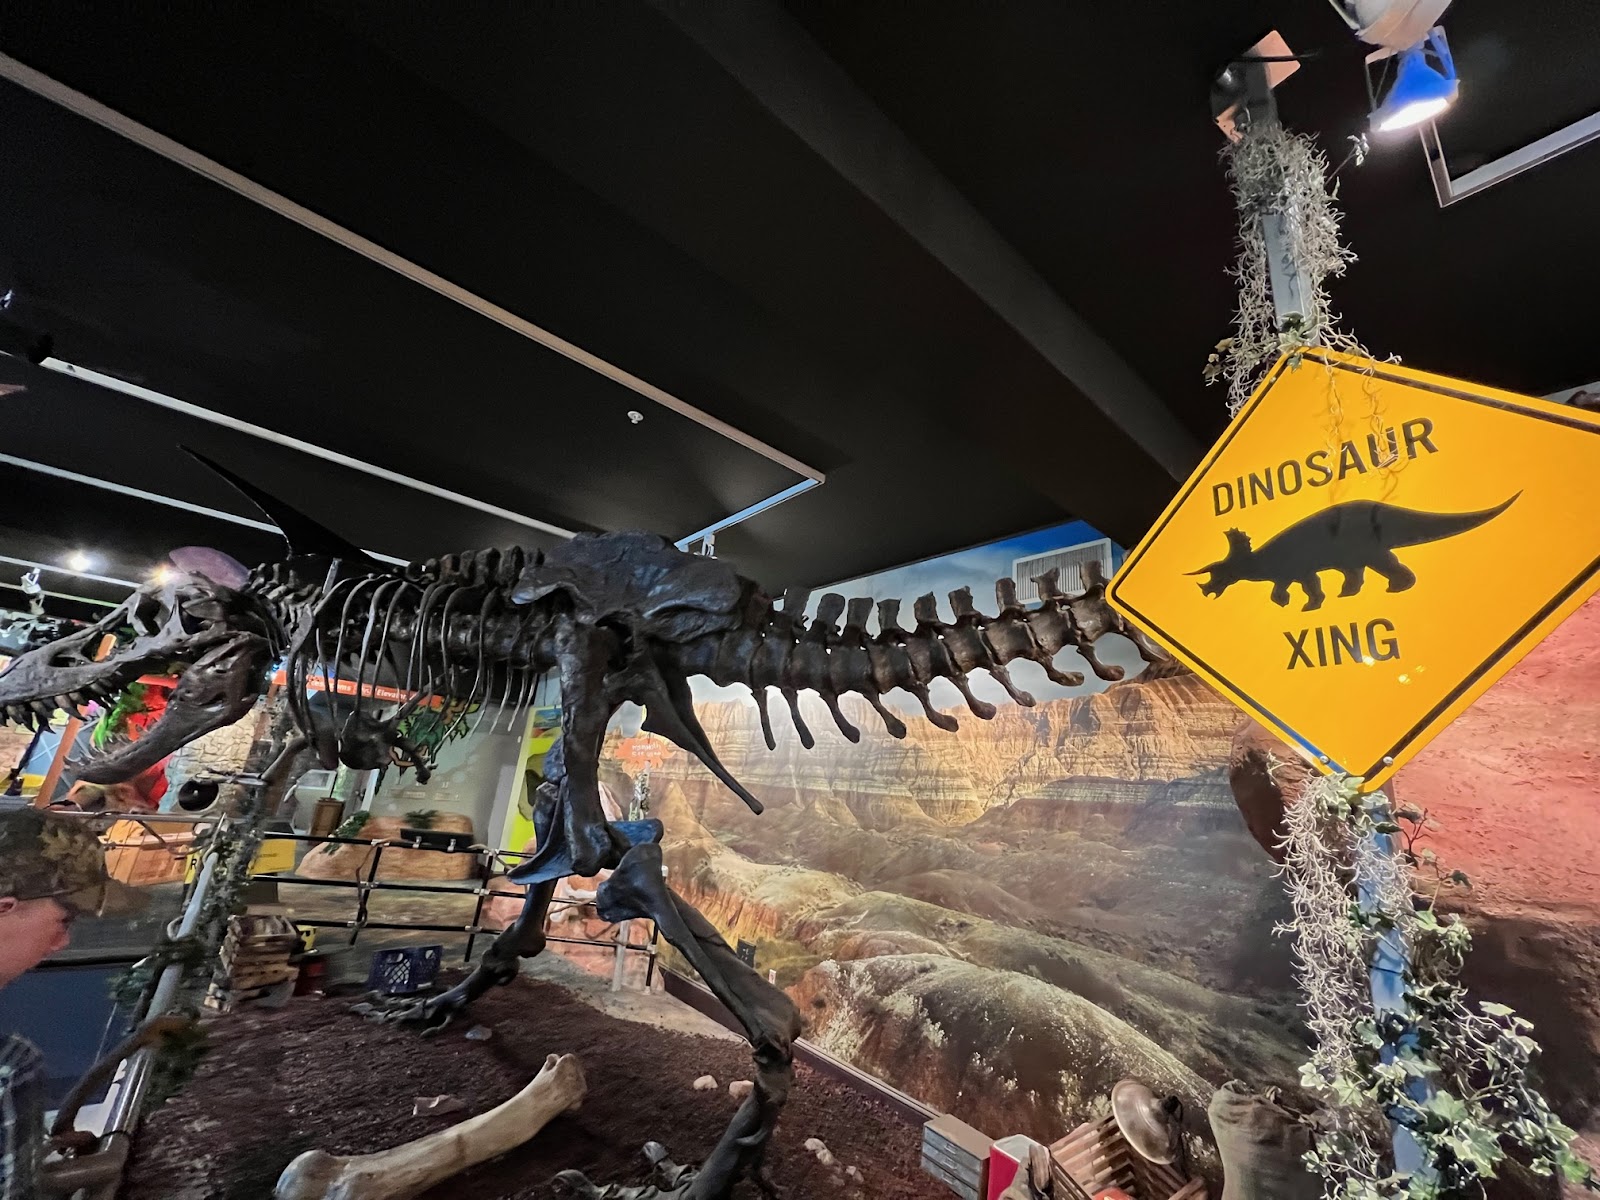 Things to do in Sioux Falls with kids in clude visiting the dinosaur exhibits bat Washington Pavilion